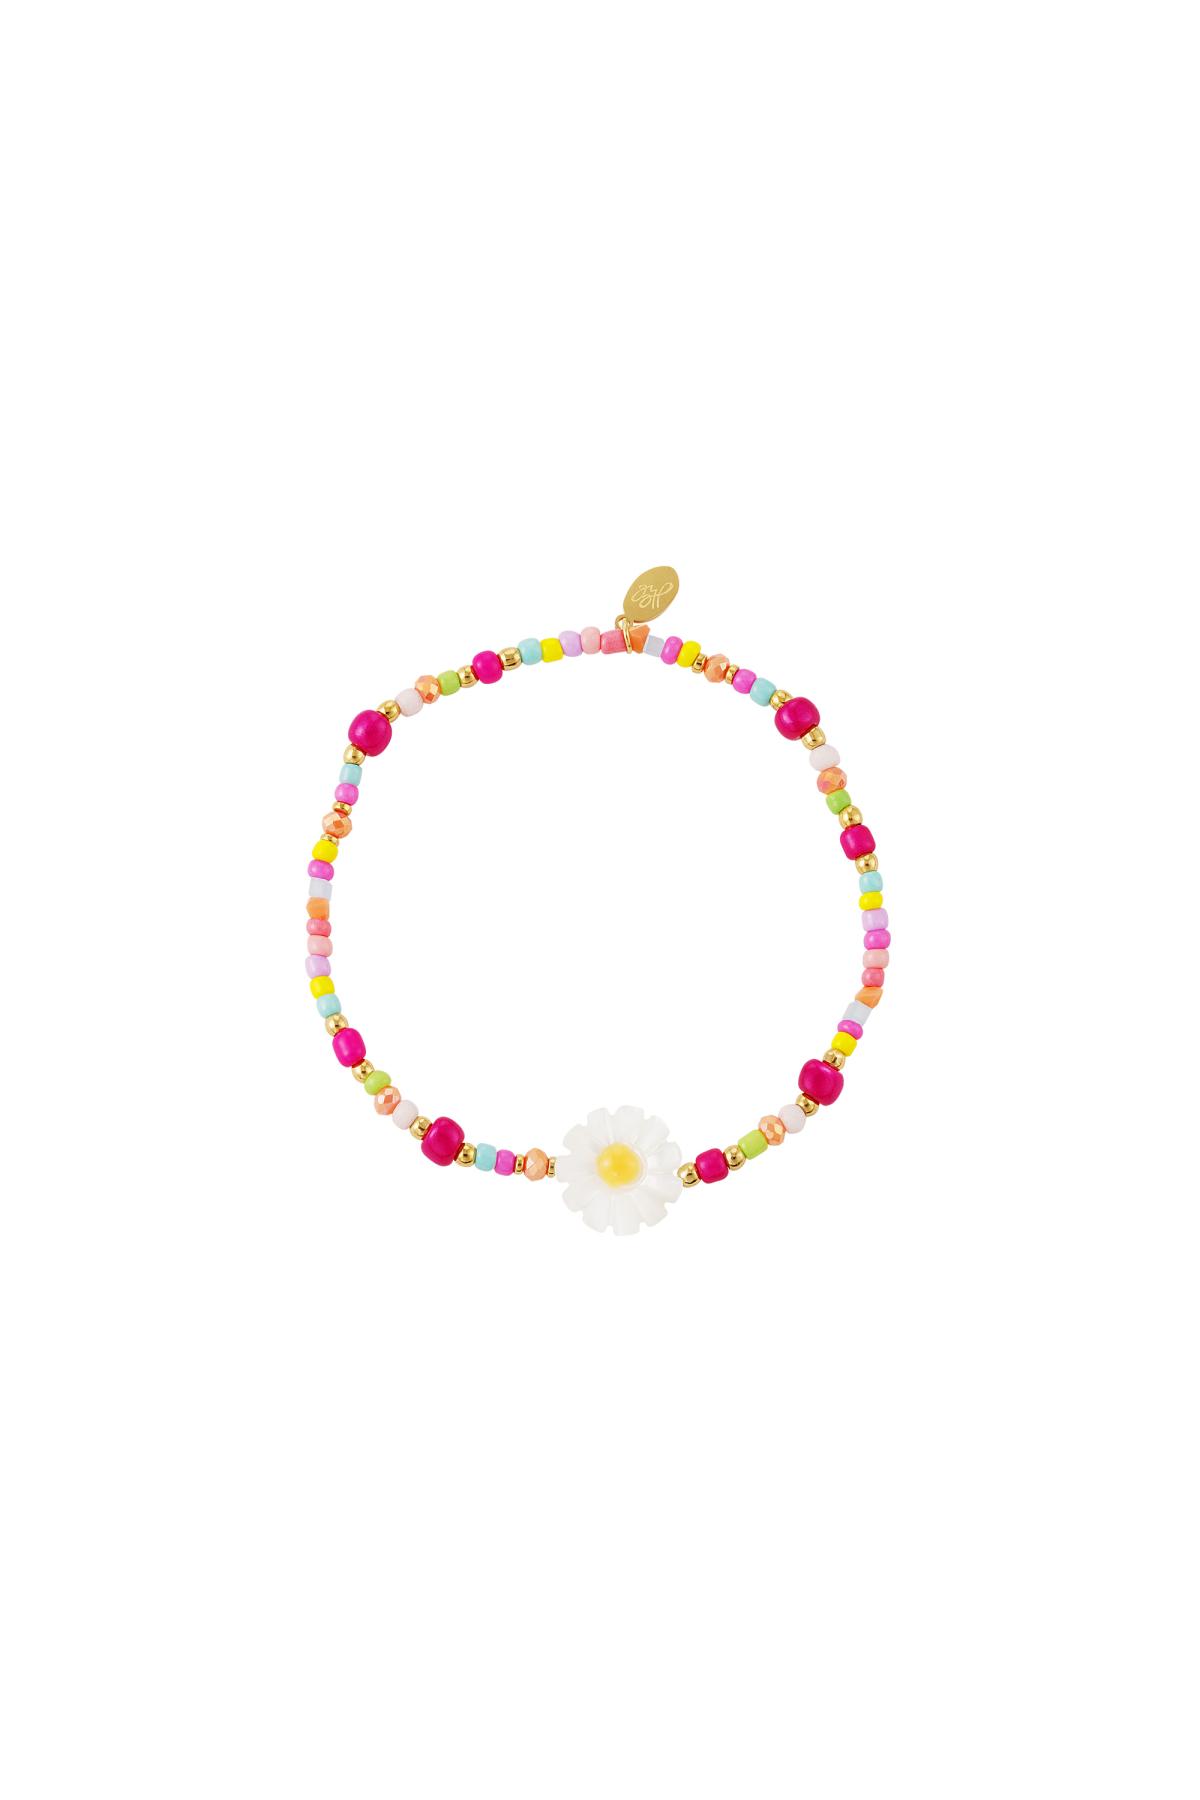 Colourful daisy bracelet - #summergirls collection Gold Stainless Steel 